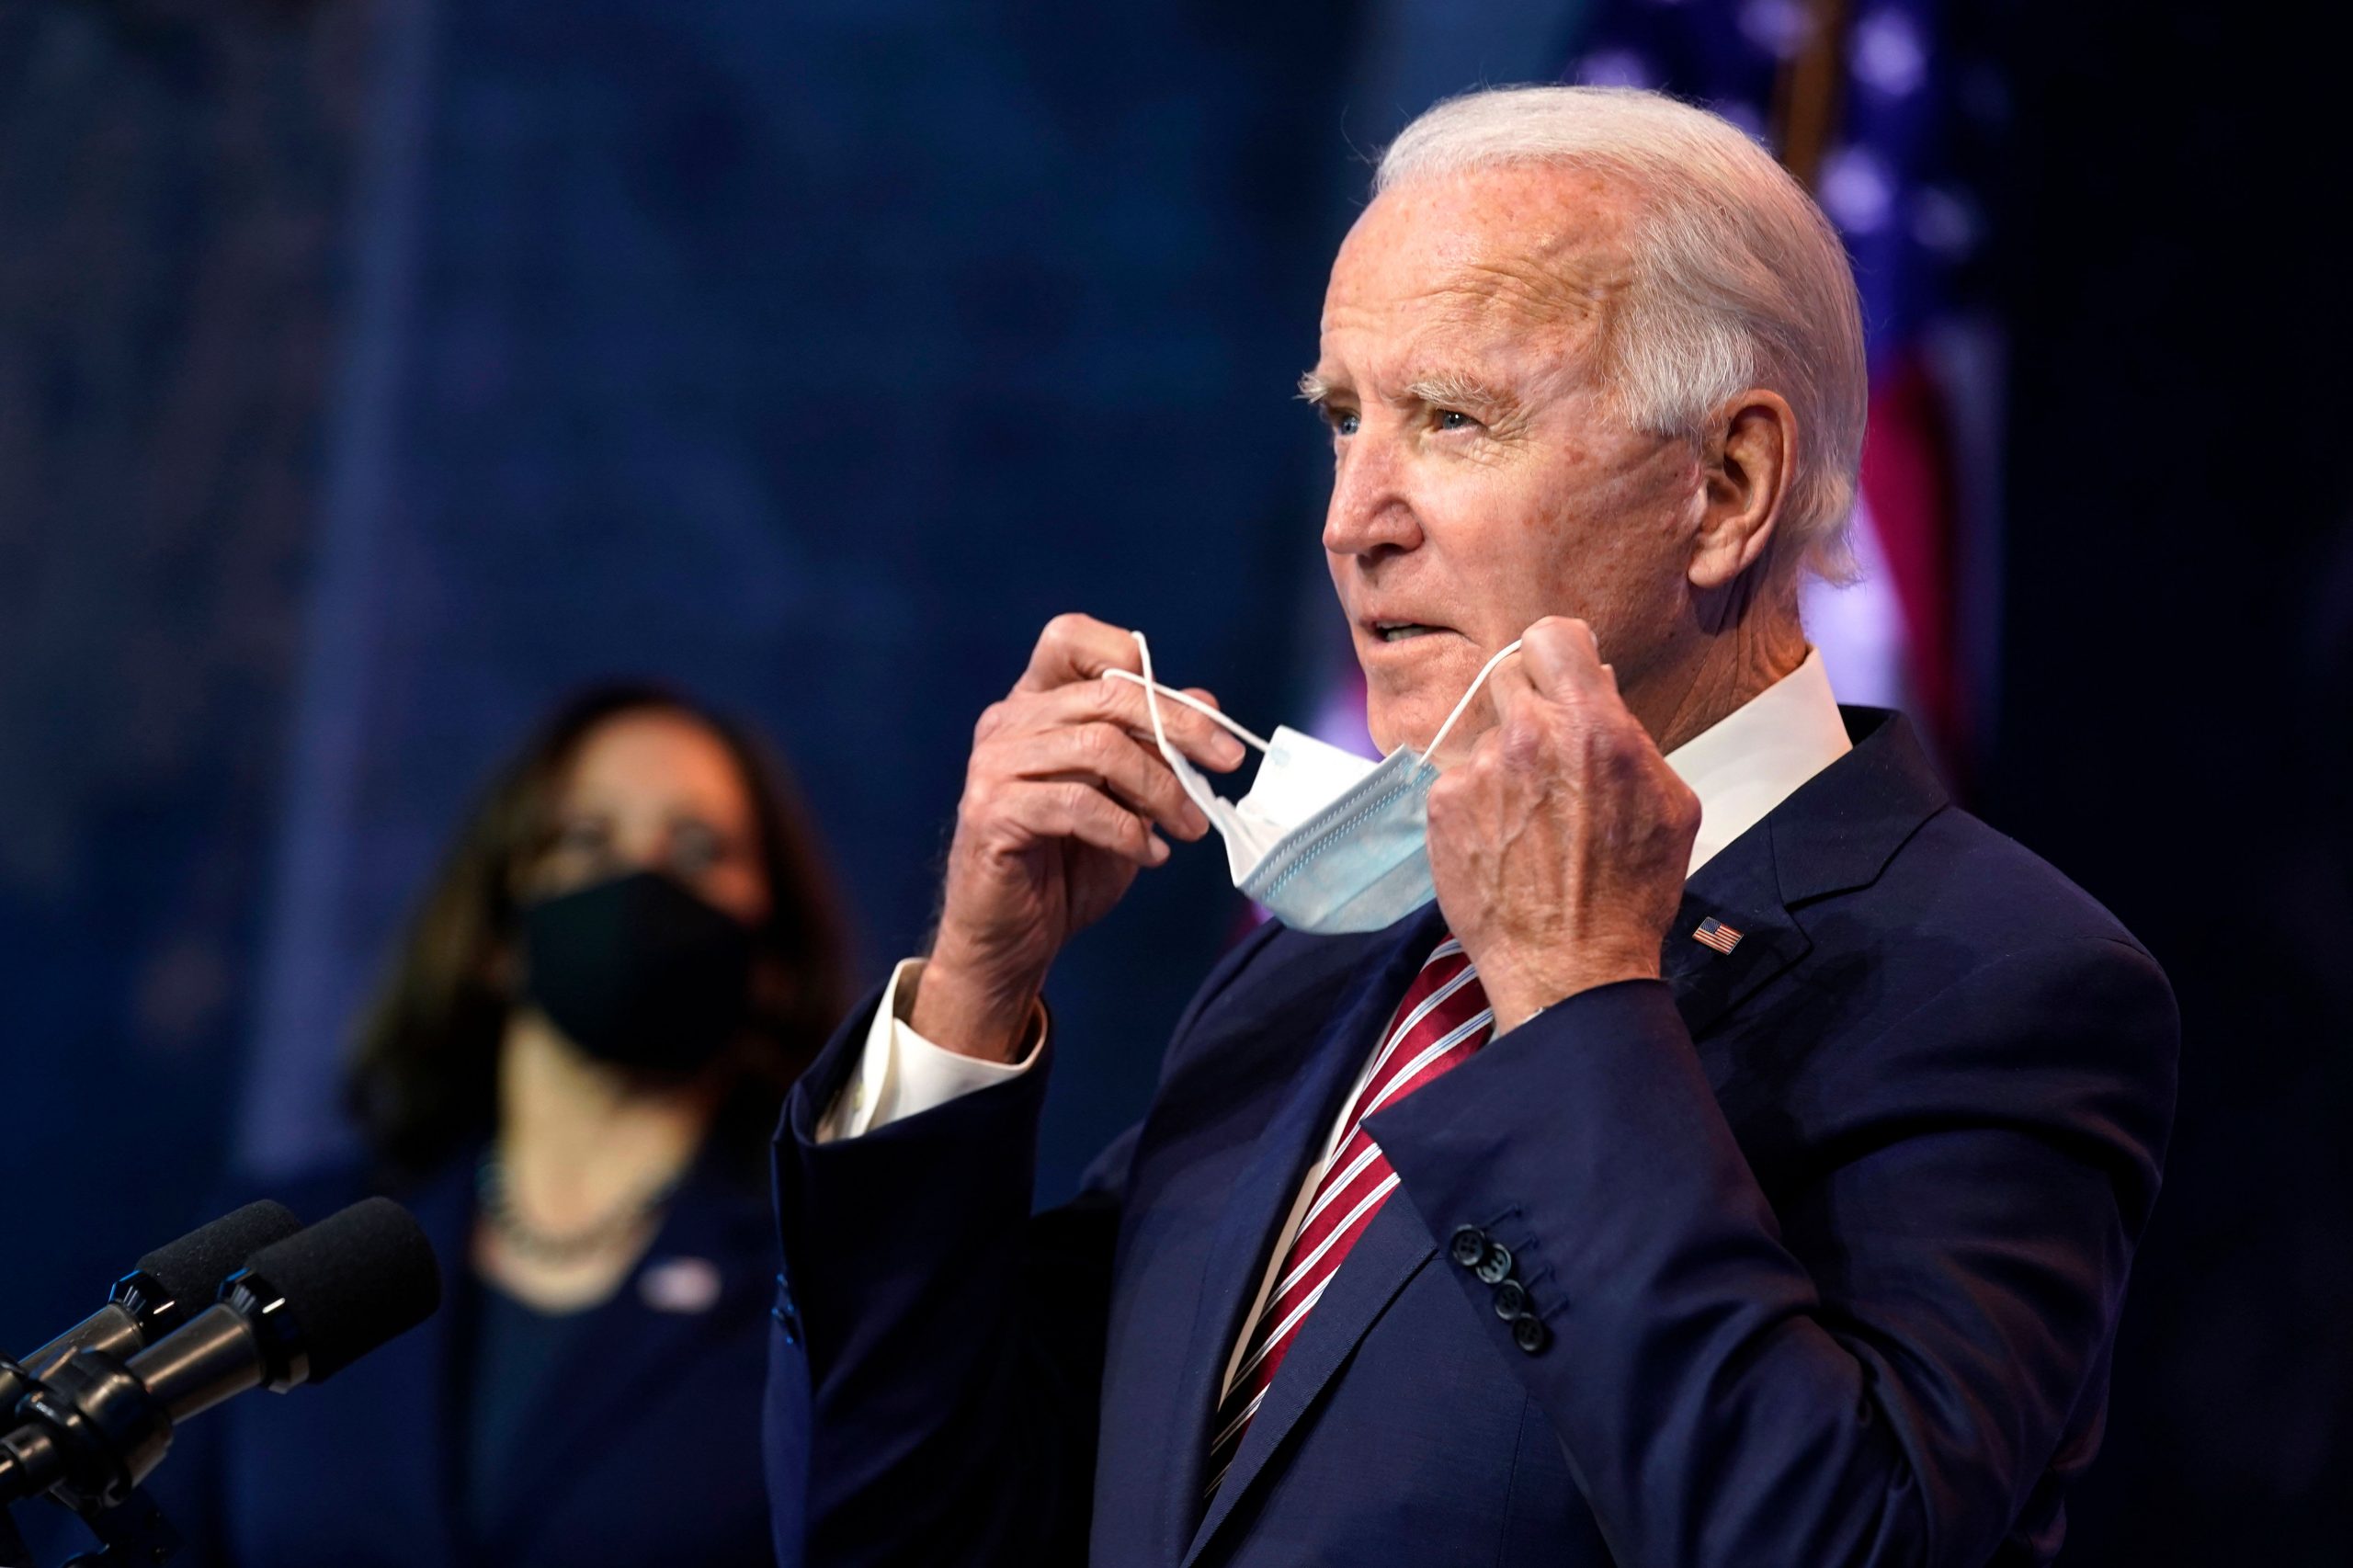 For Joe Biden, it’ll take more than appointing a francophone team, to improve US-France ties